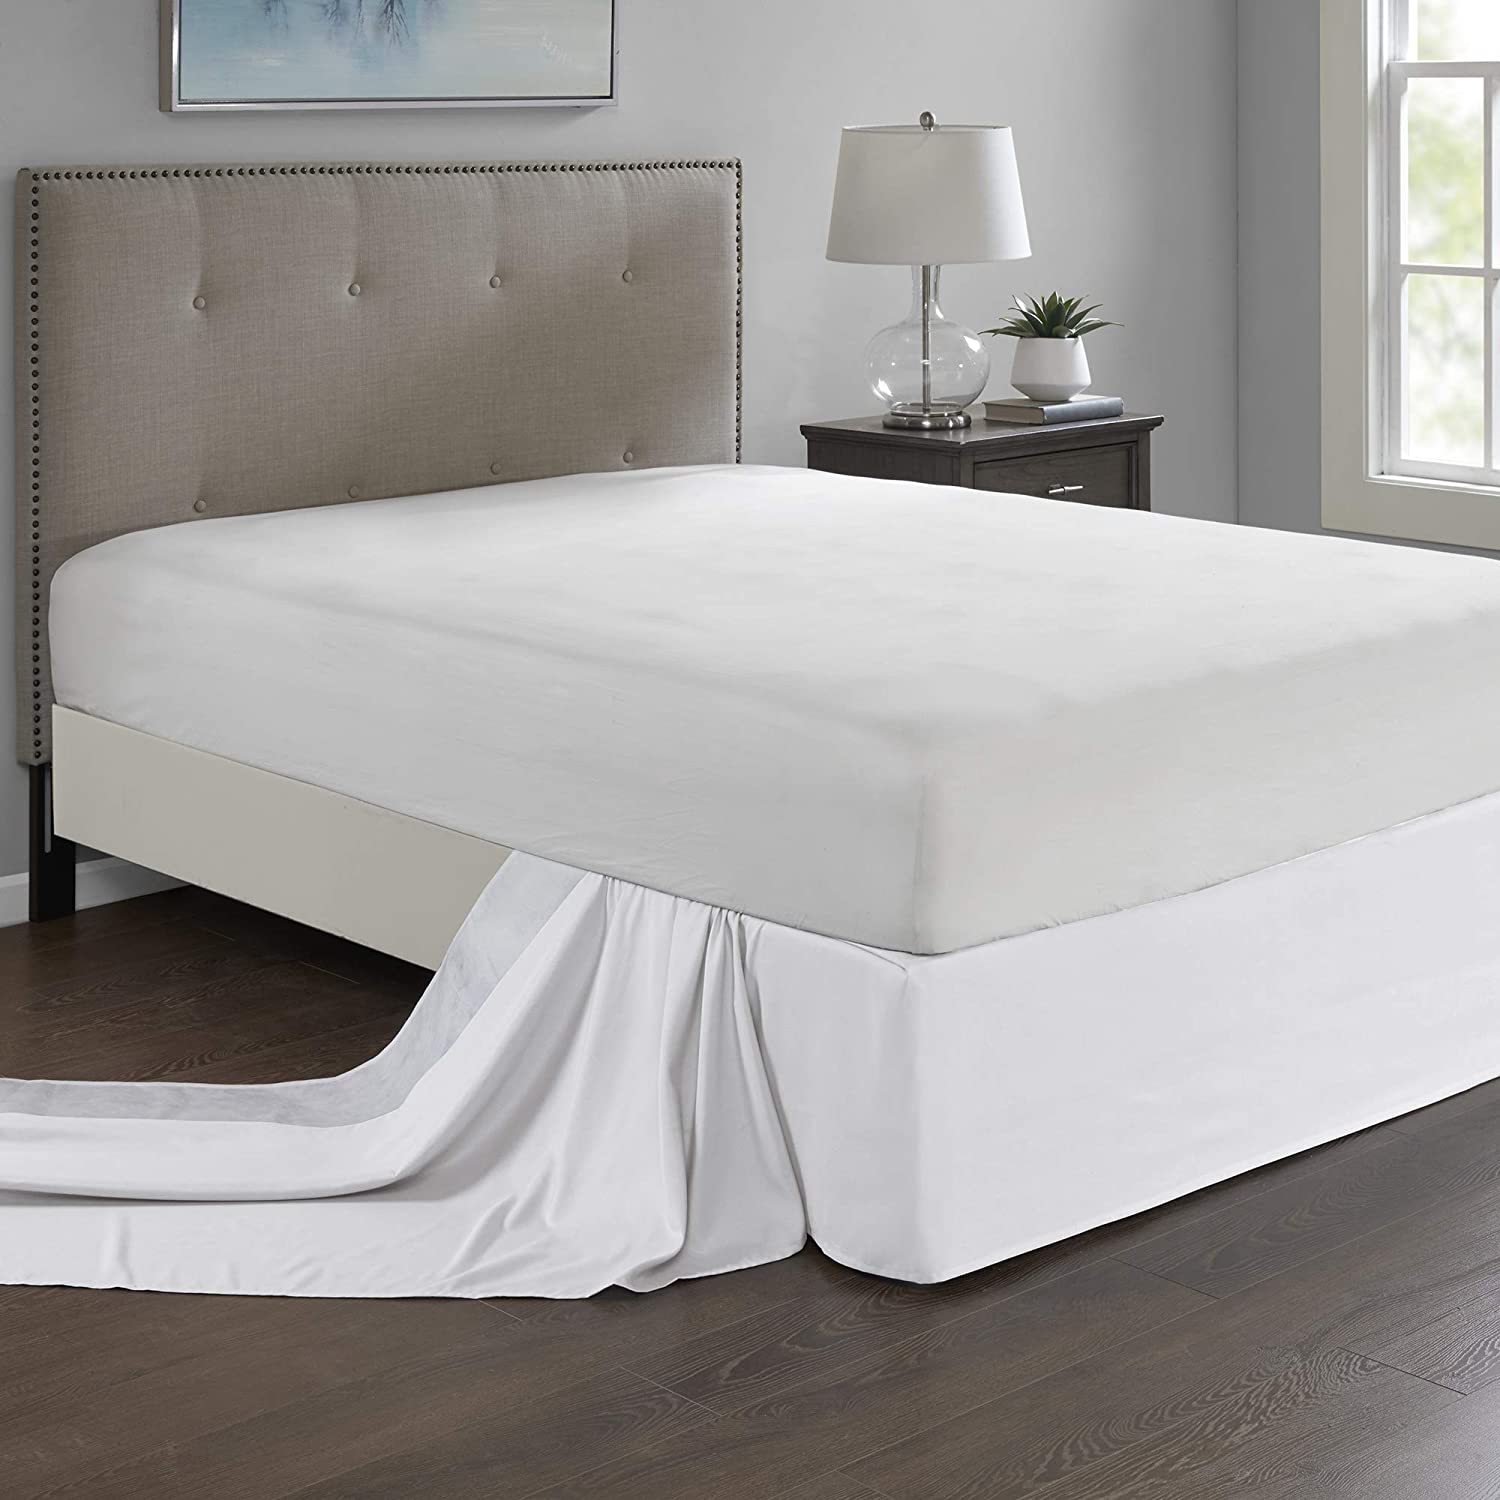 Bed Skirt For An Adjustable, Can You Use A Dust Ruffle With An Adjustable Bed